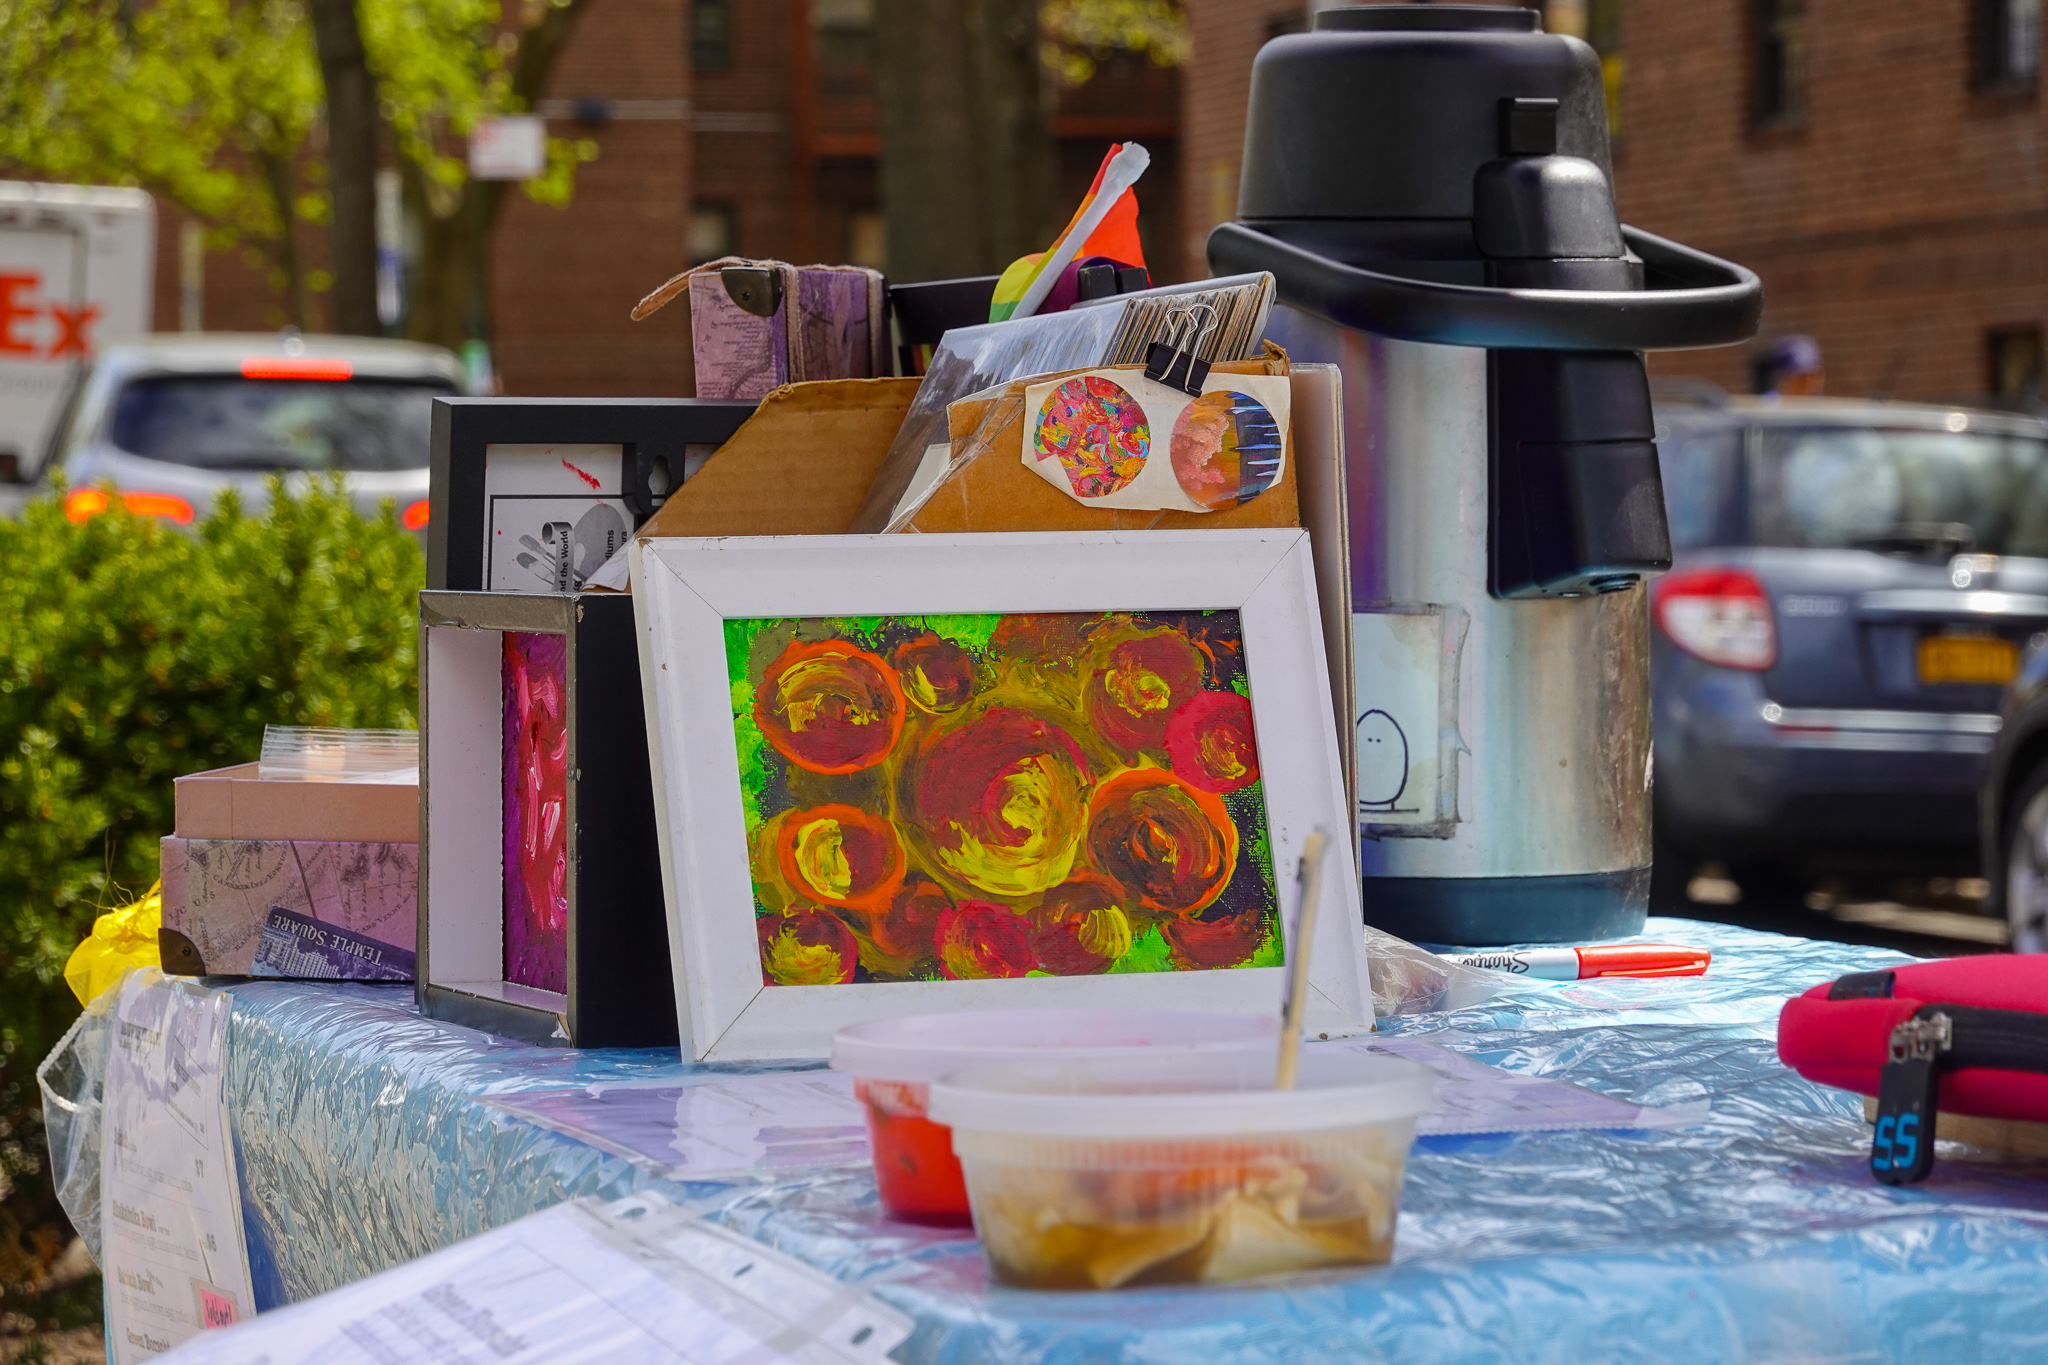 Esthi displays her artwork on the Sandwich Therapy table